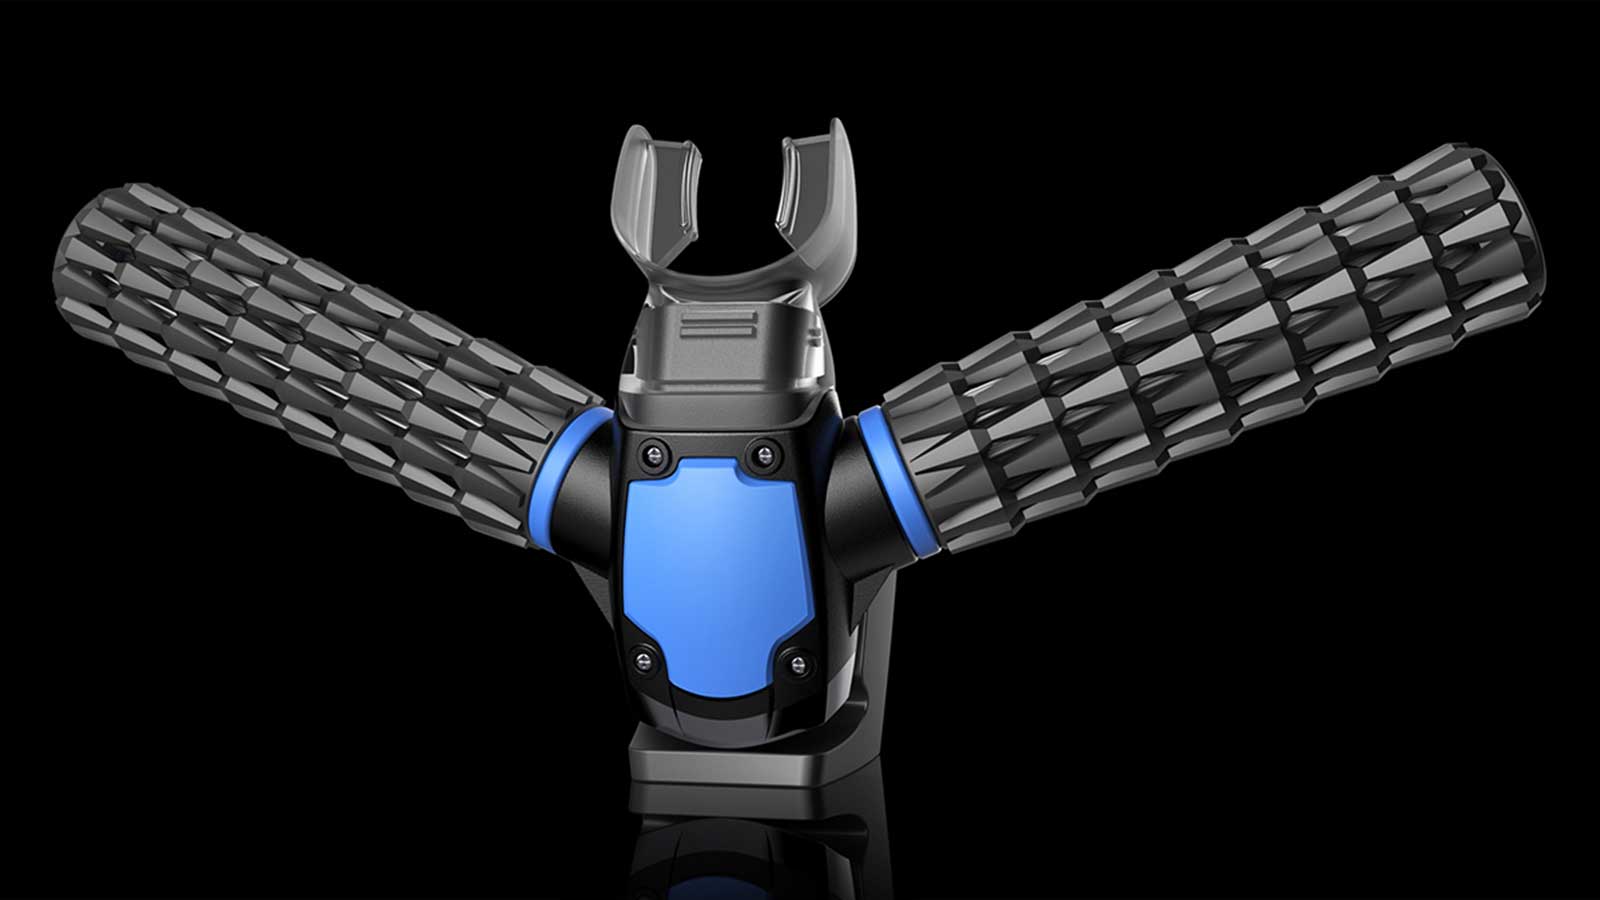 TRITON GILLS THE WORLD'S FIRST ARTIFICIAL GILLS